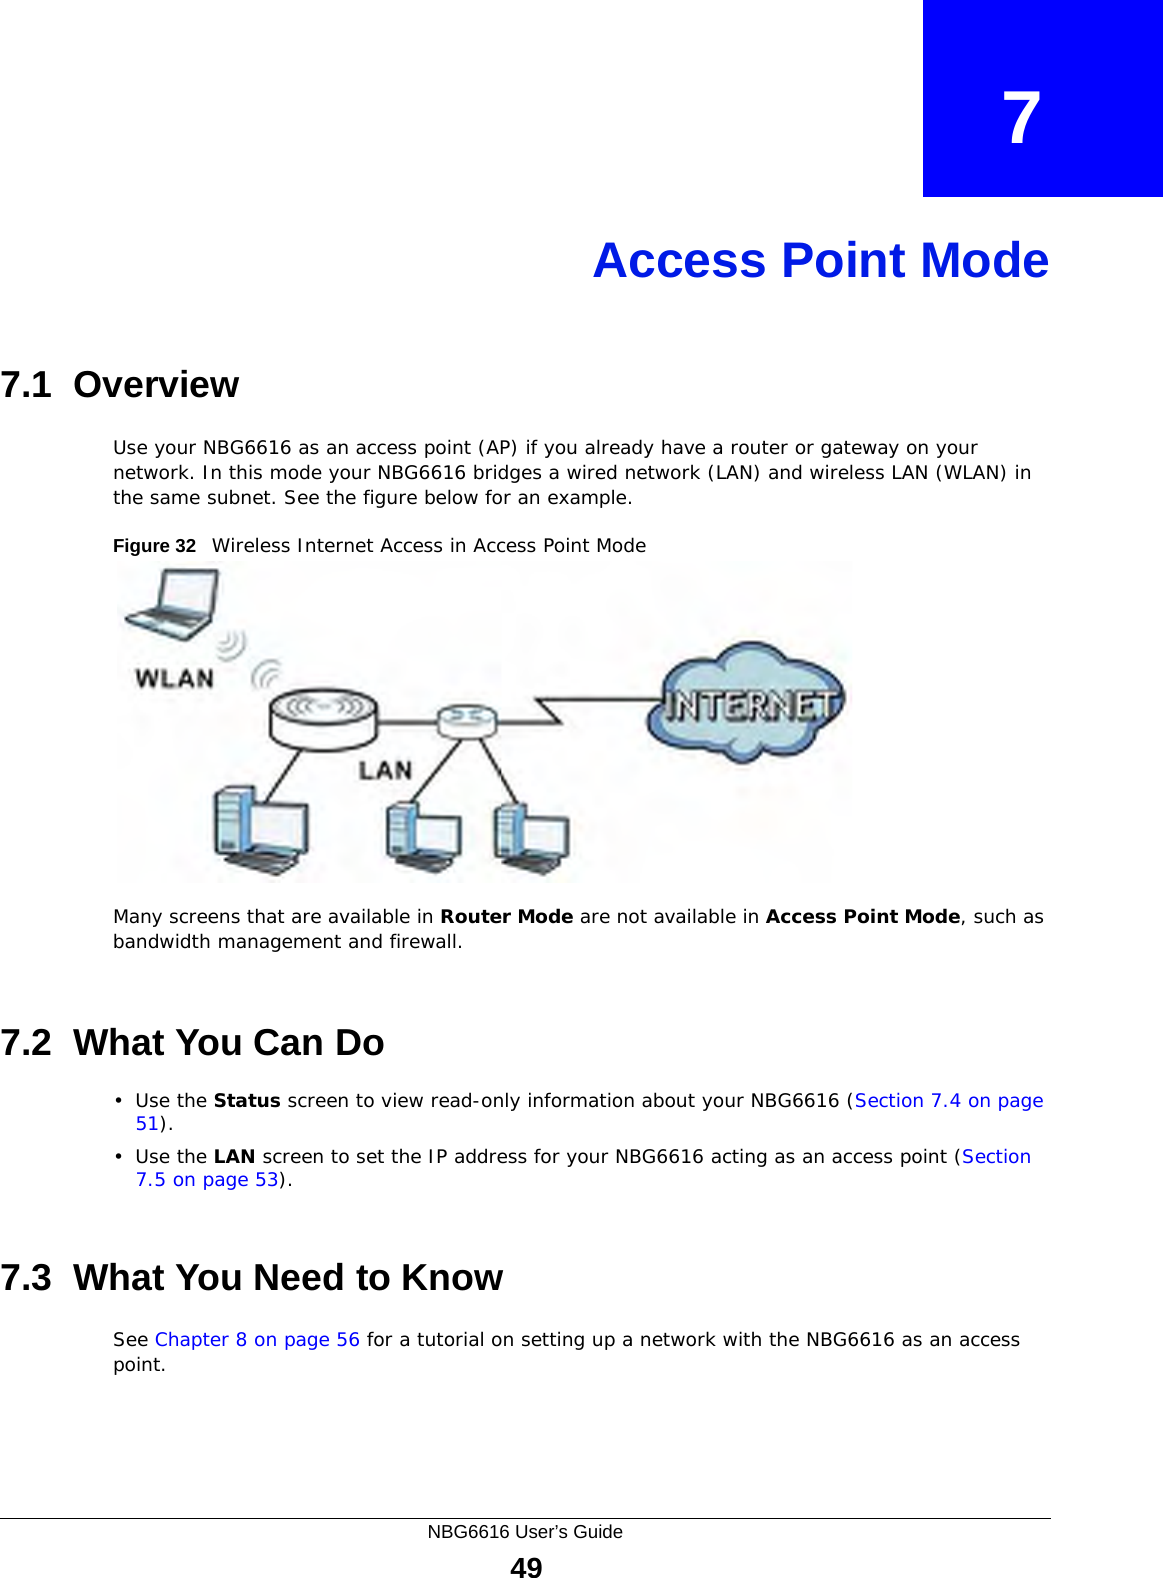 NBG6616 User’s Guide49CHAPTER   7Access Point Mode7.1  OverviewUse your NBG6616 as an access point (AP) if you already have a router or gateway on your network. In this mode your NBG6616 bridges a wired network (LAN) and wireless LAN (WLAN) in the same subnet. See the figure below for an example.Figure 32   Wireless Internet Access in Access Point Mode Many screens that are available in Router Mode are not available in Access Point Mode, such as bandwidth management and firewall.7.2  What You Can Do•Use the Status screen to view read-only information about your NBG6616 (Section 7.4 on page 51).•Use the LAN screen to set the IP address for your NBG6616 acting as an access point (Section 7.5 on page 53).7.3  What You Need to KnowSee Chapter 8 on page 56 for a tutorial on setting up a network with the NBG6616 as an access point.